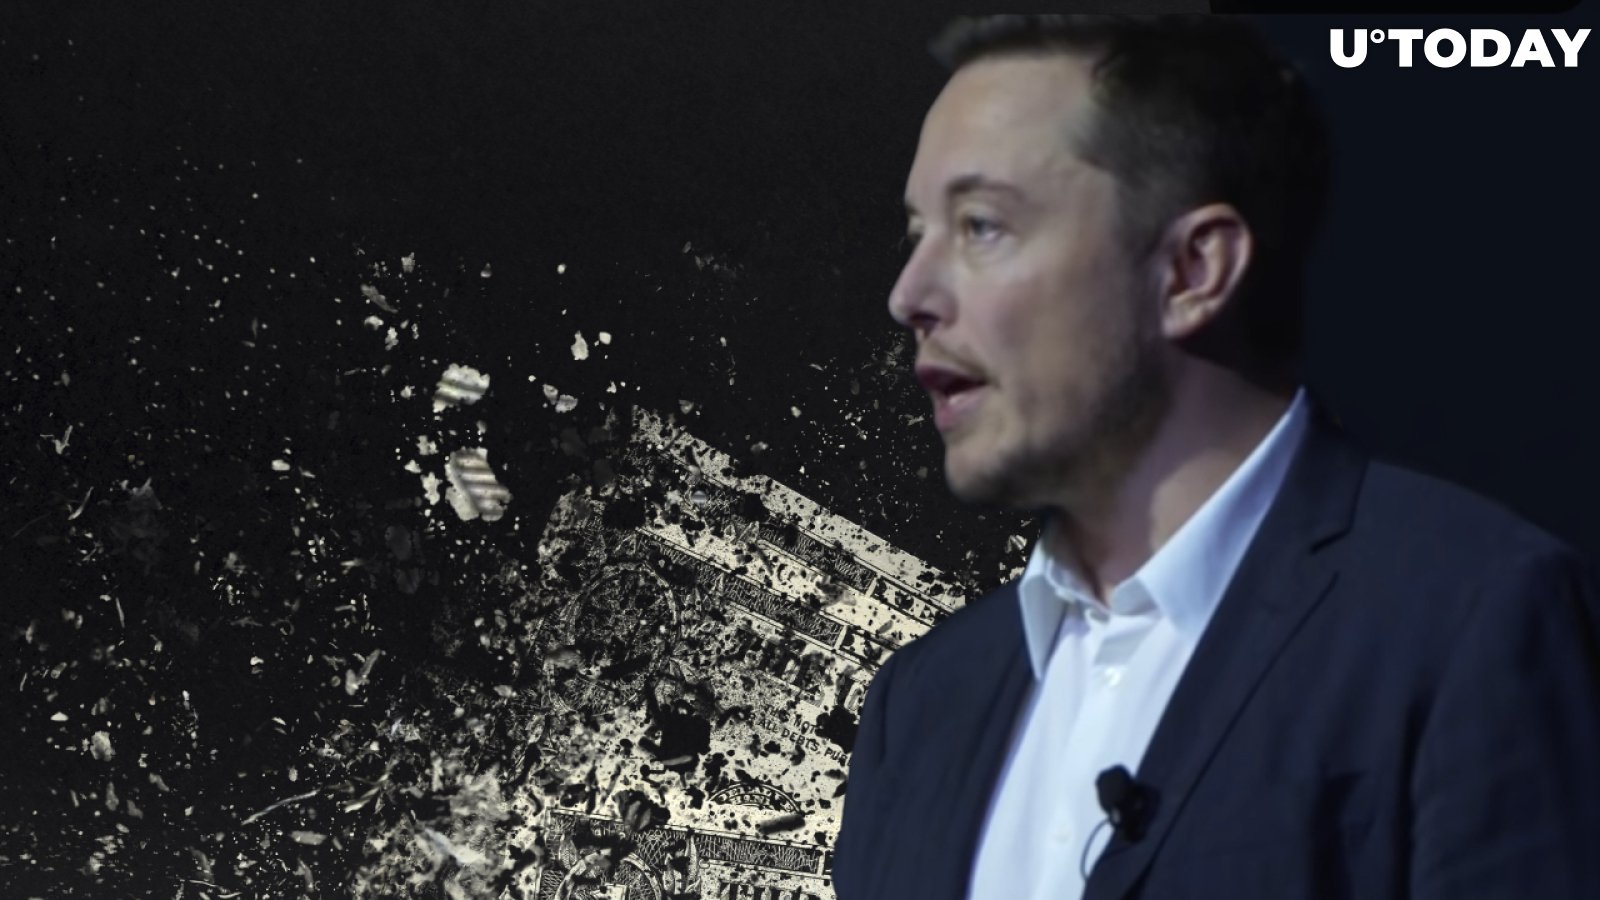 Elon Musk Teams Up with Dogecoin Creator to Criticize U.S. Inflation